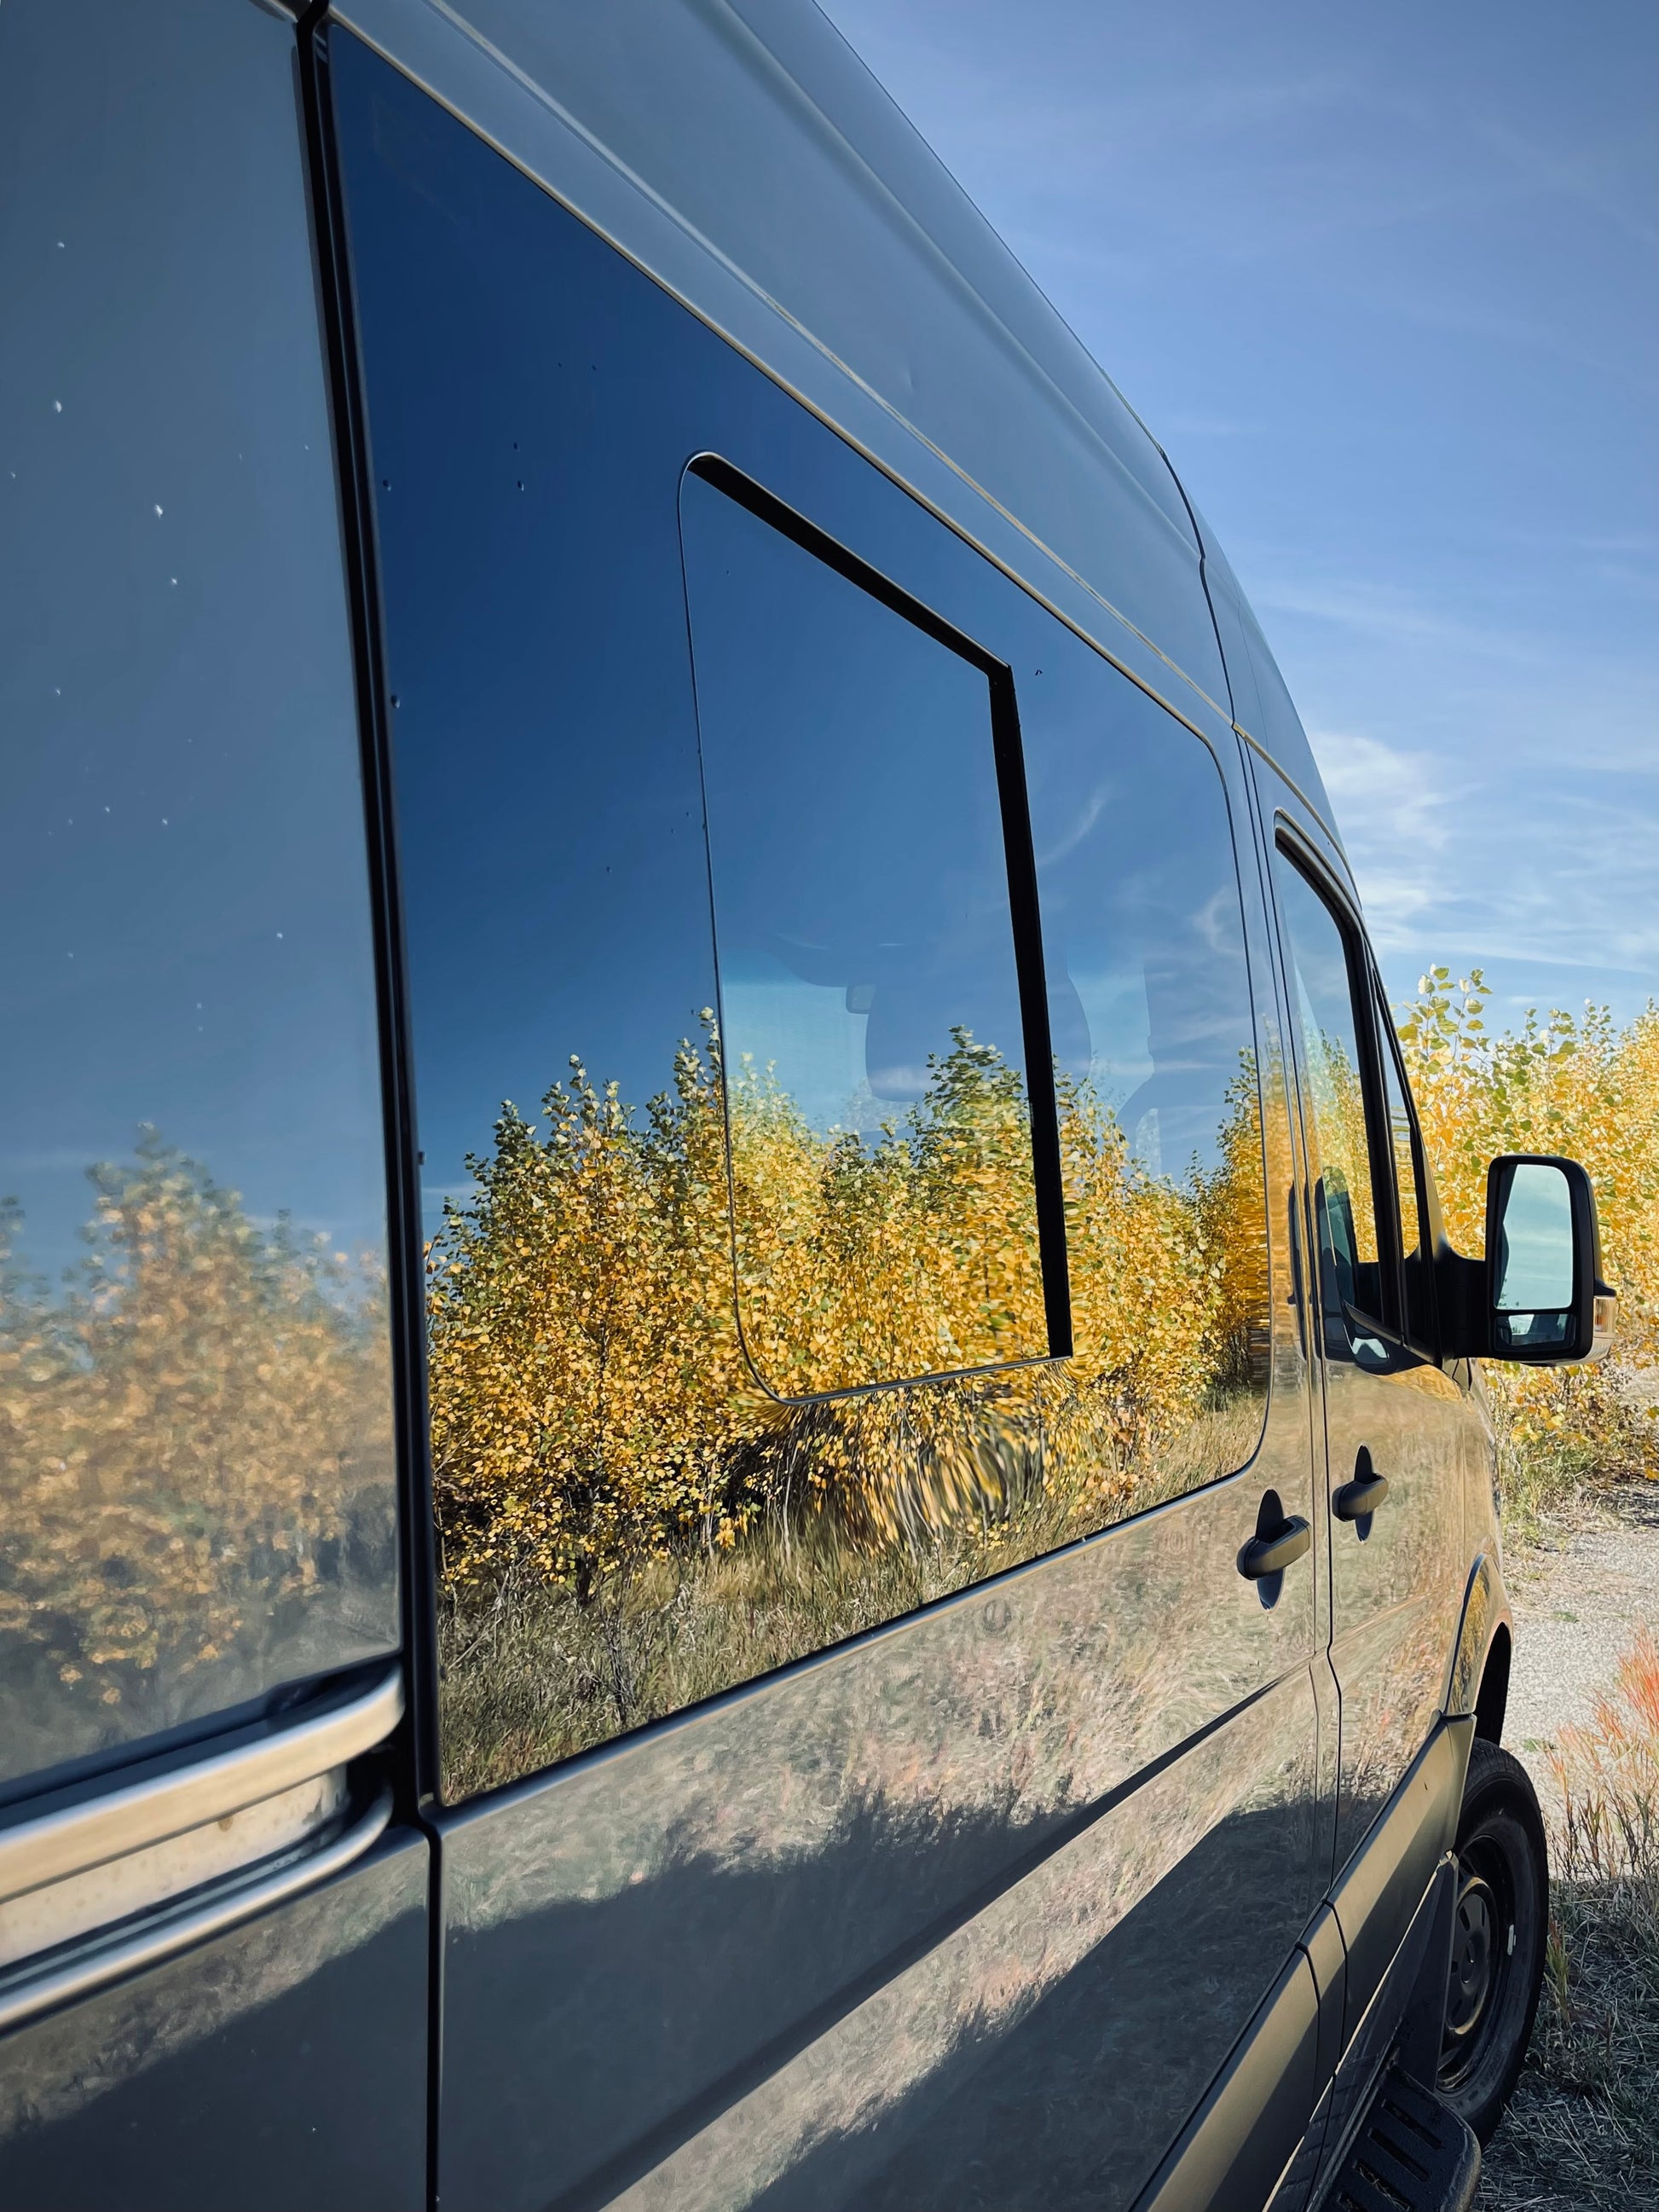 Exterior side view of custom van windows showing the reflection of trees.